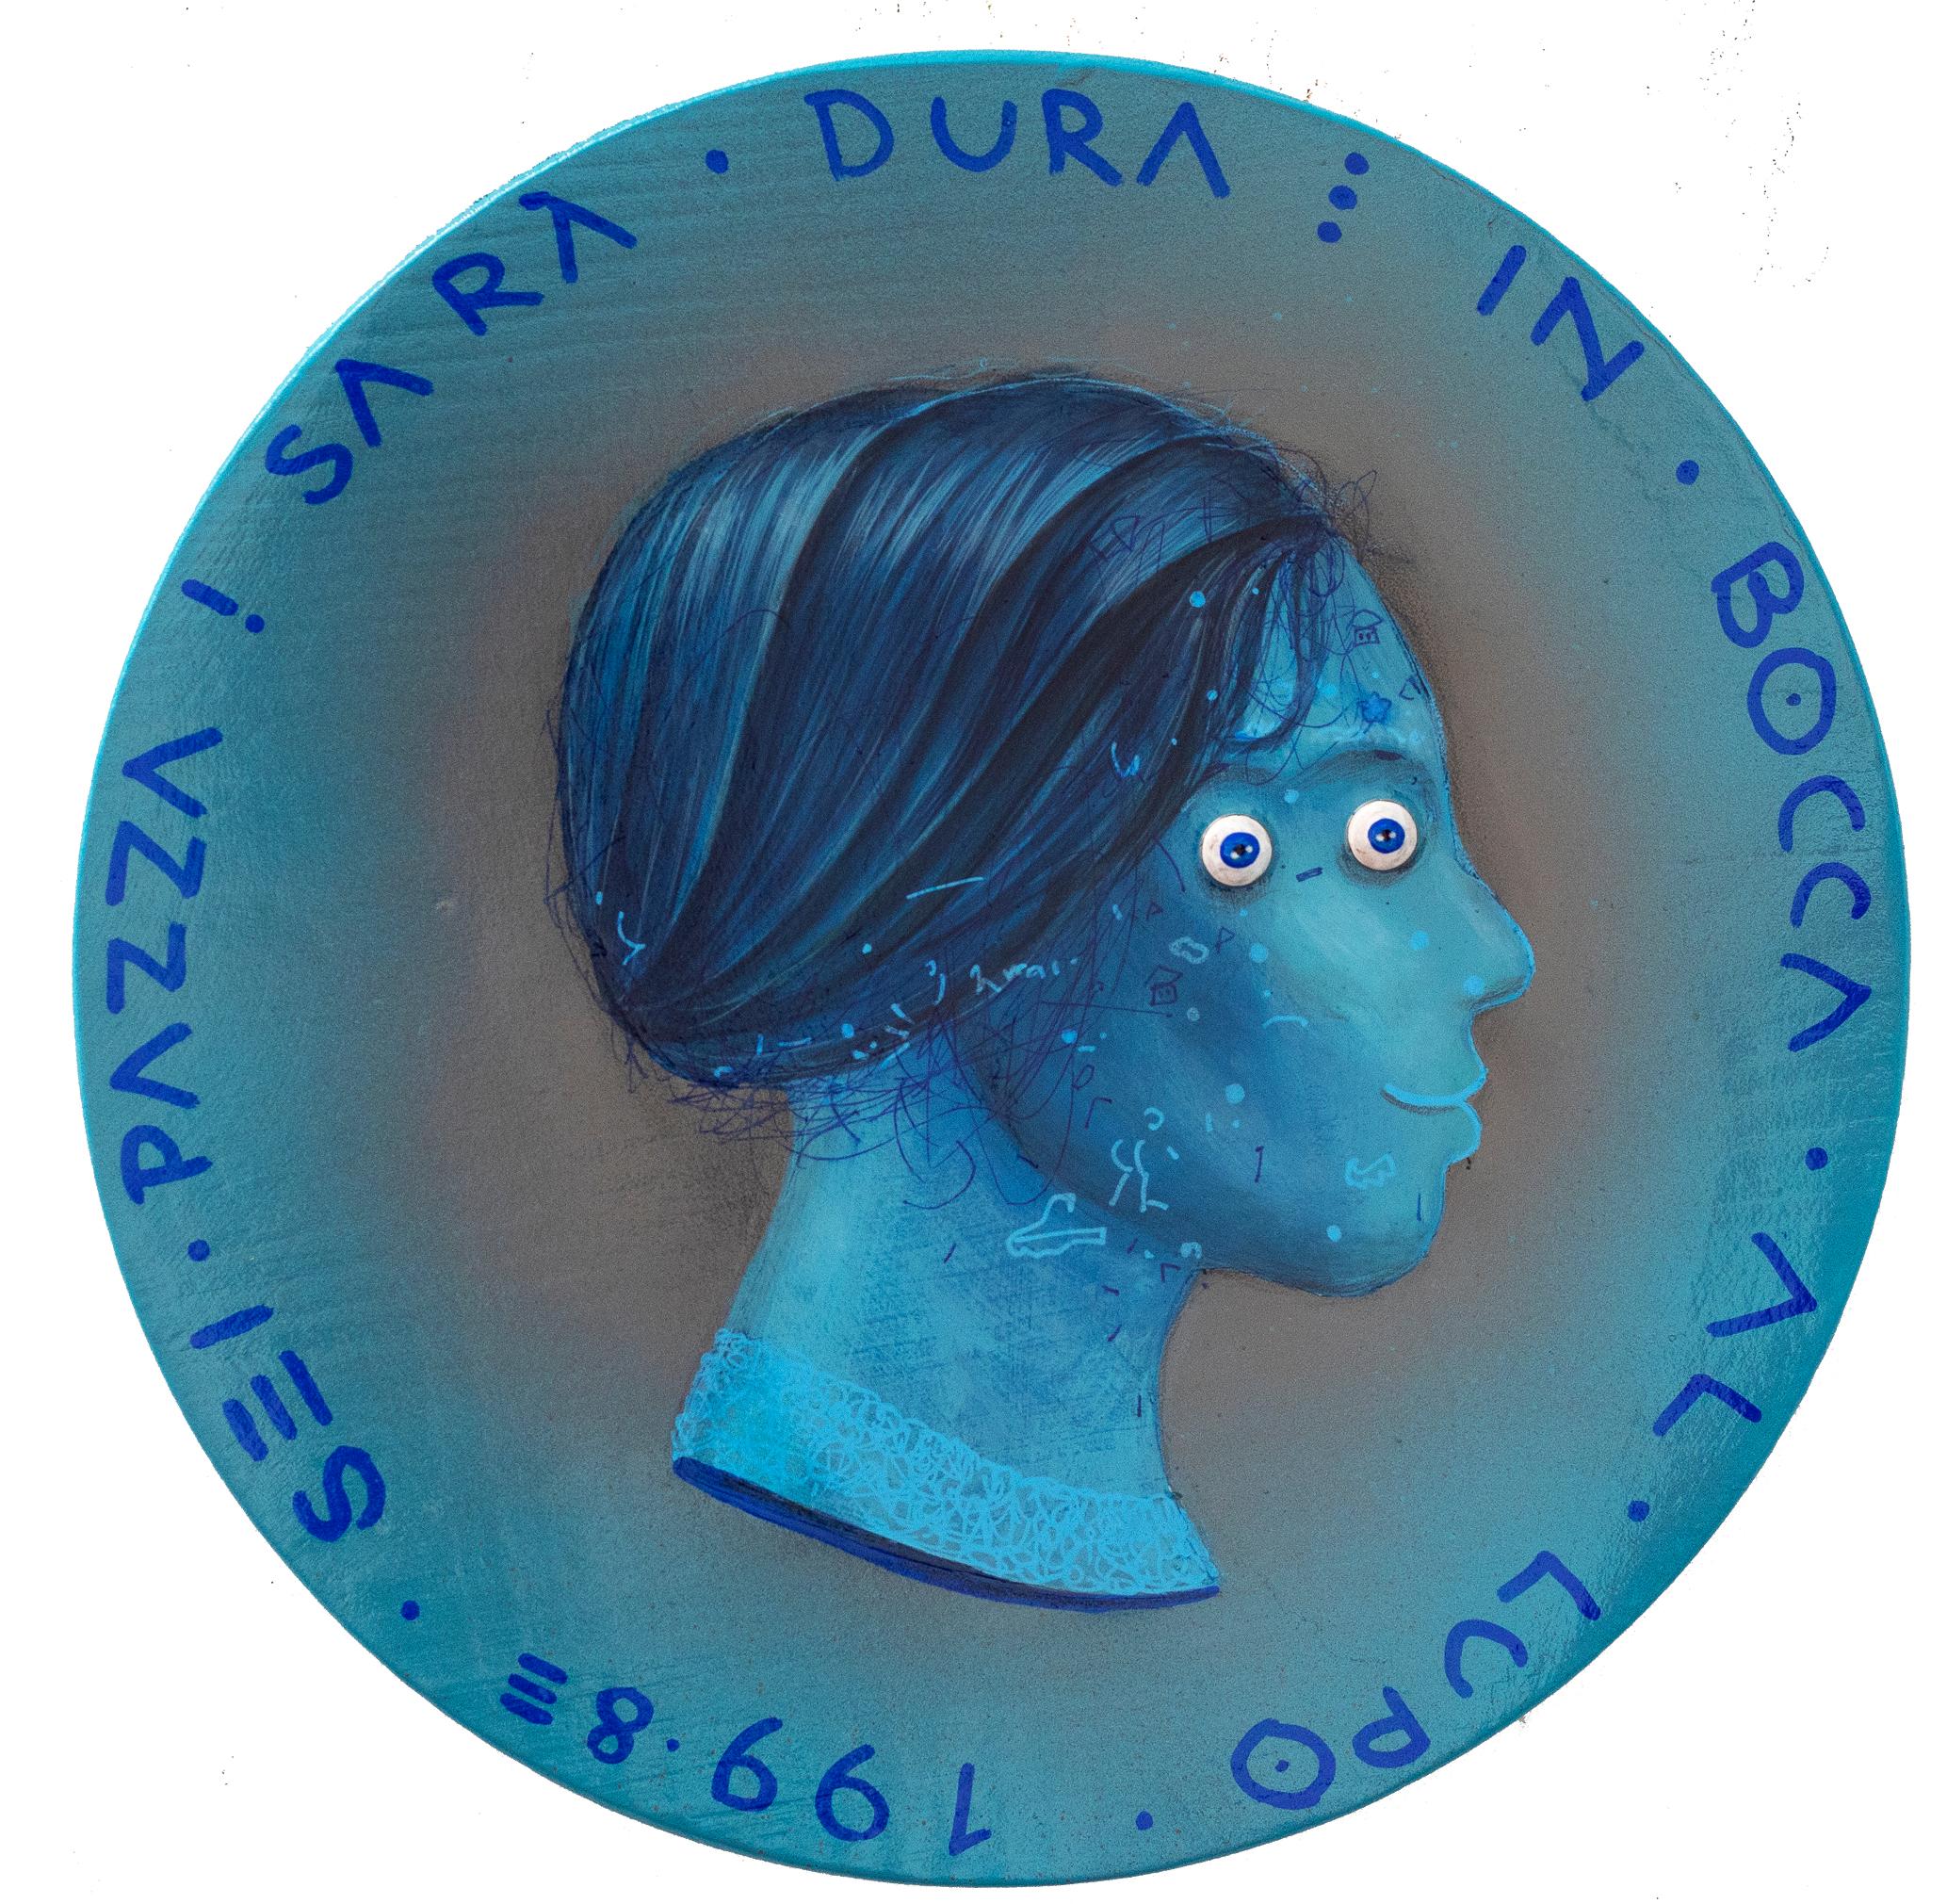 Pop Surrealist Double Face Portrait On A Blue Wooden Coin.  "Currency #195" - Mixed Media Art by Natasha Lelenco